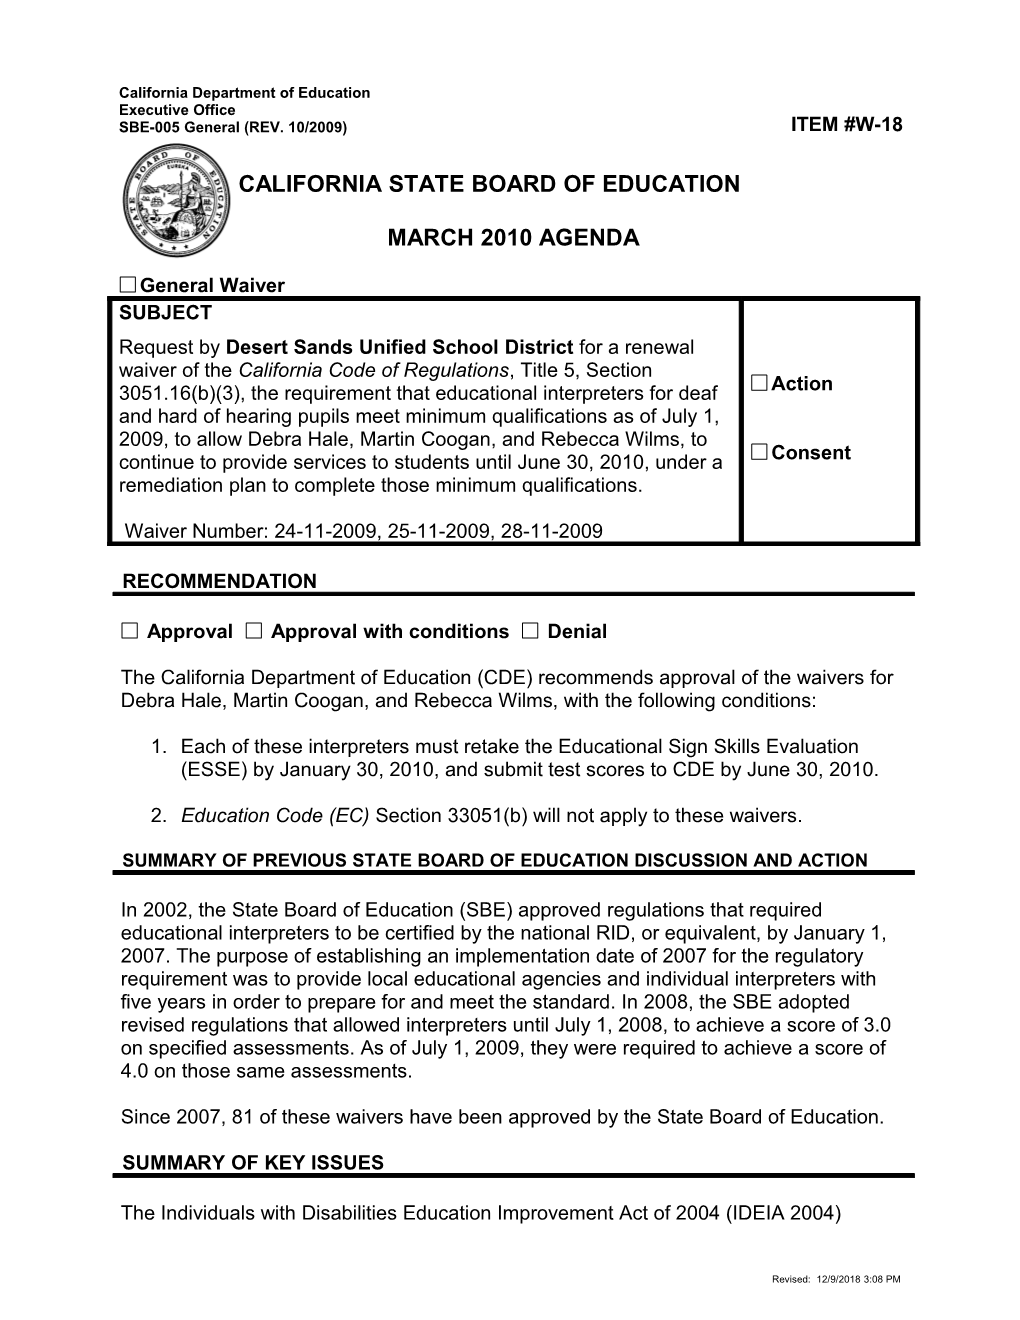 March 2010 Waiver Item W18 - Meeting Agendas (CA State Board of Education)